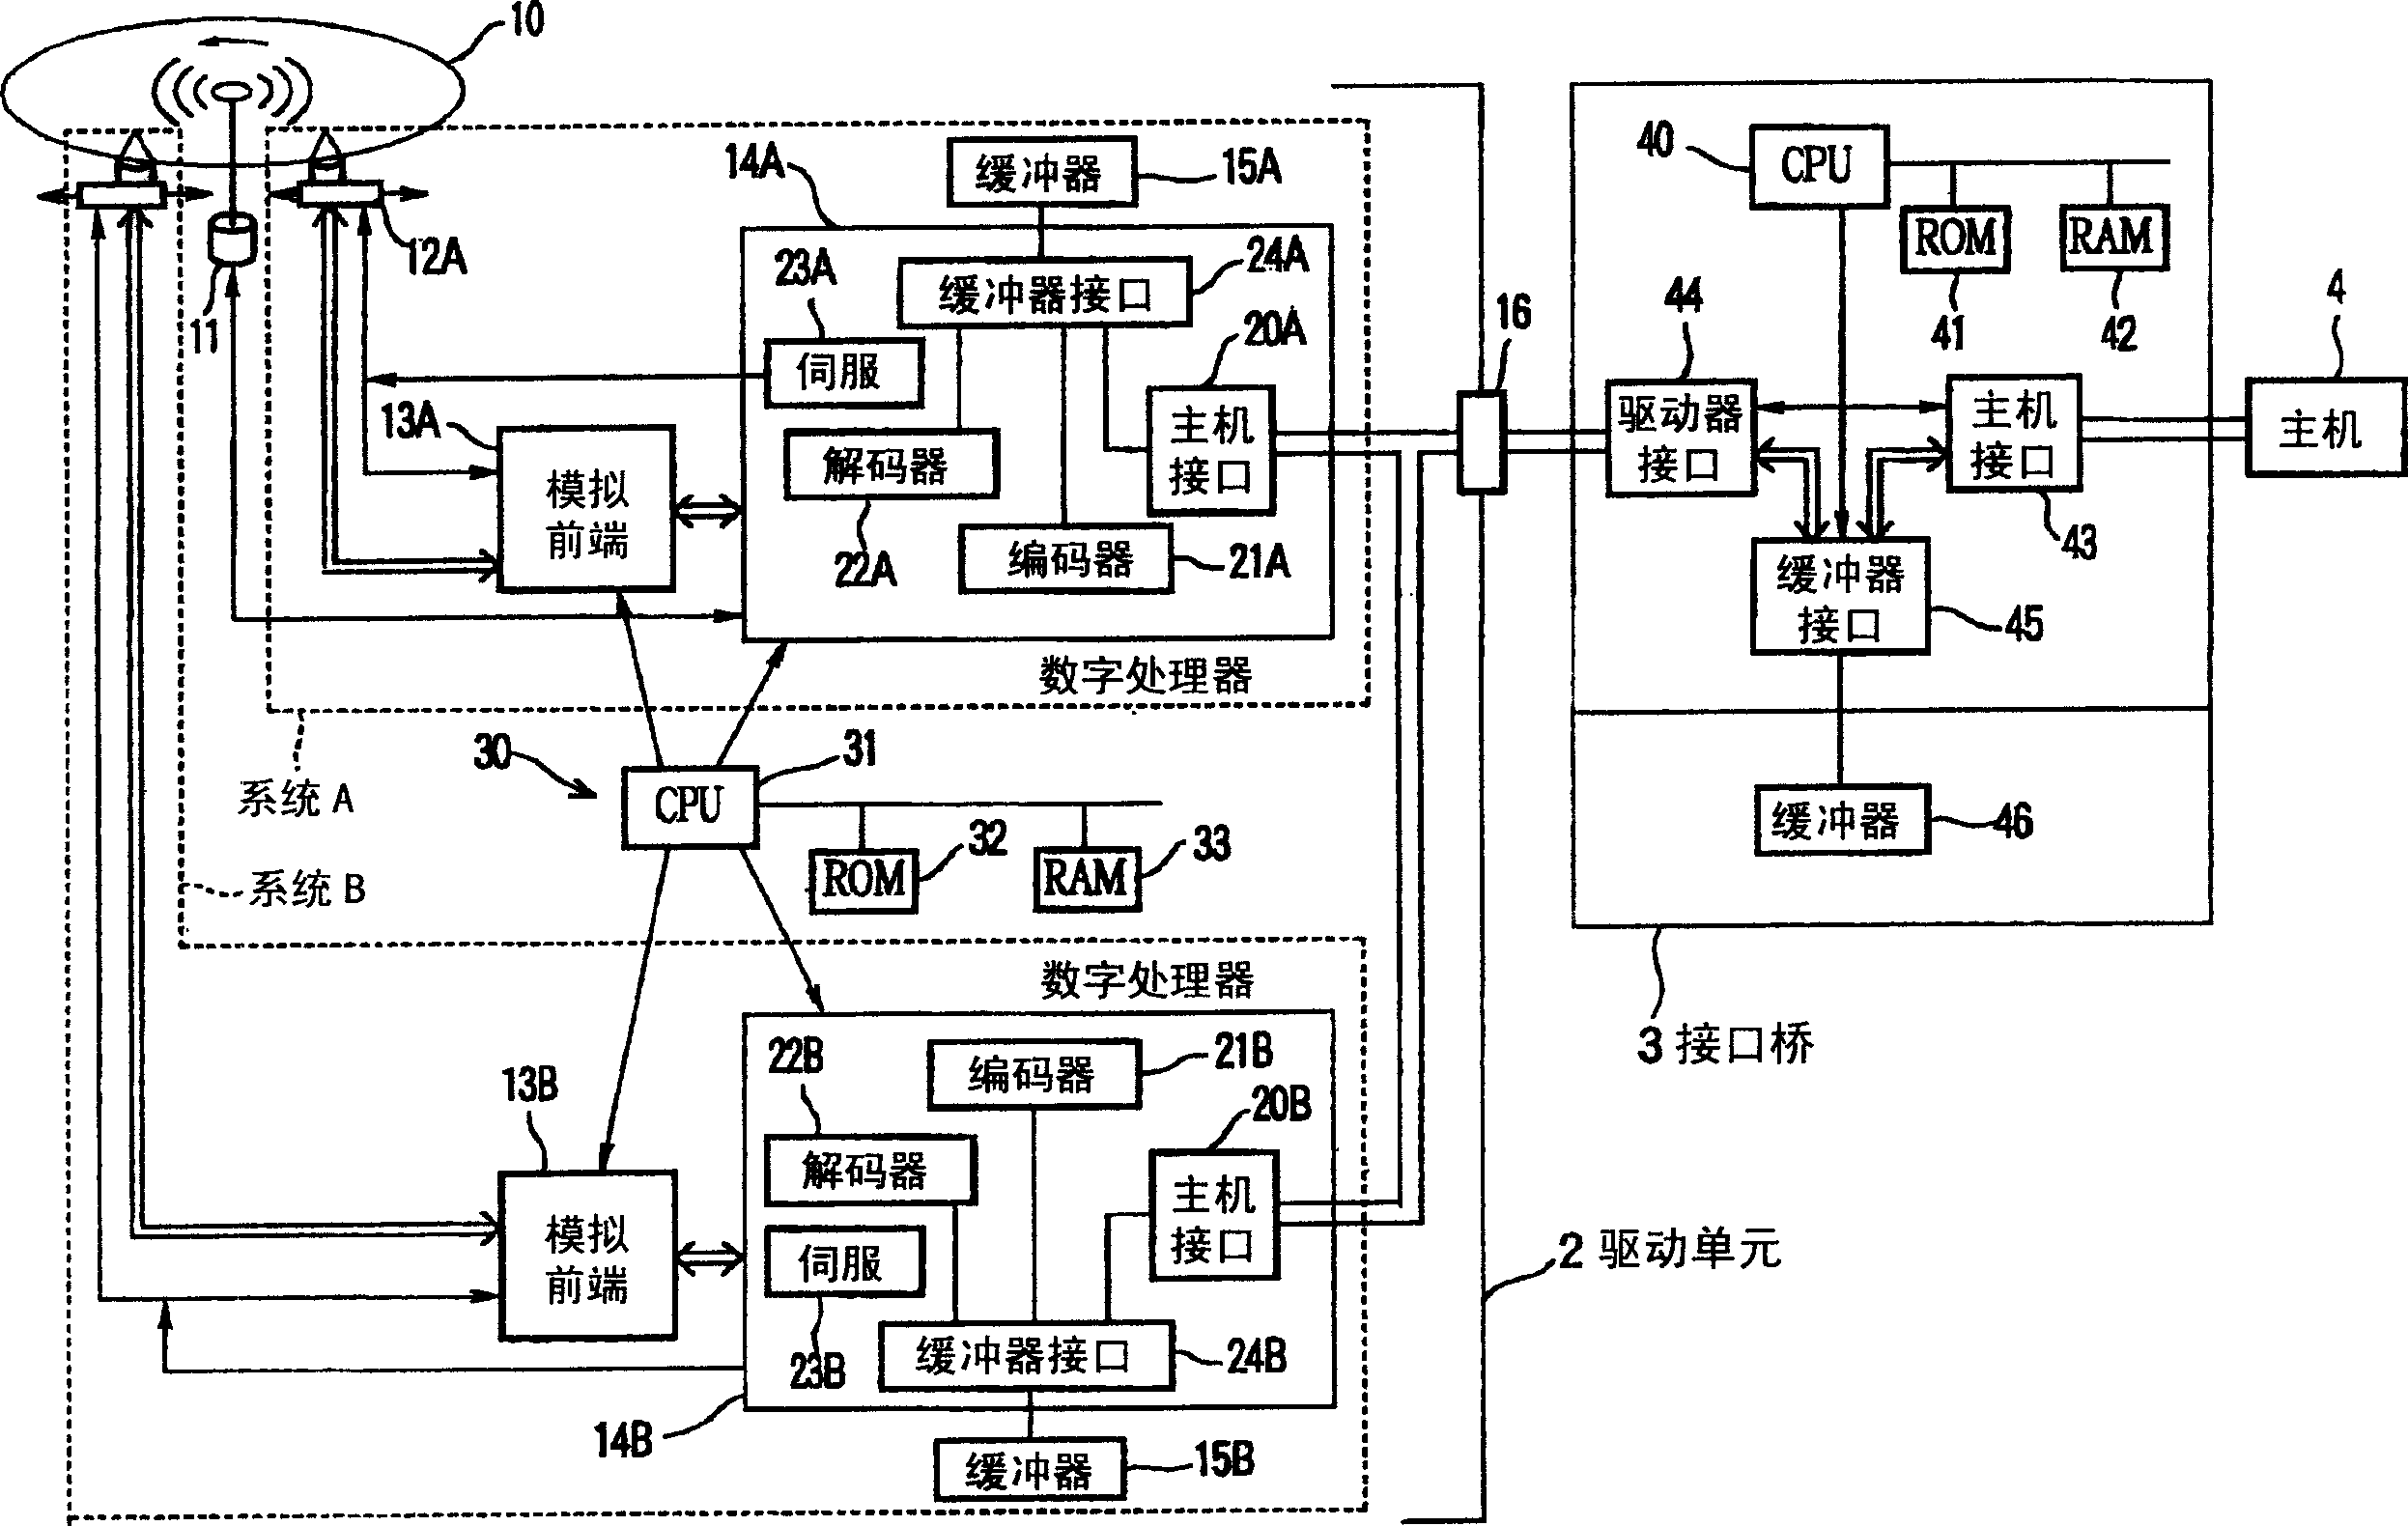 Optical disc apparatus with multiple reproduction/record units for parallel operation